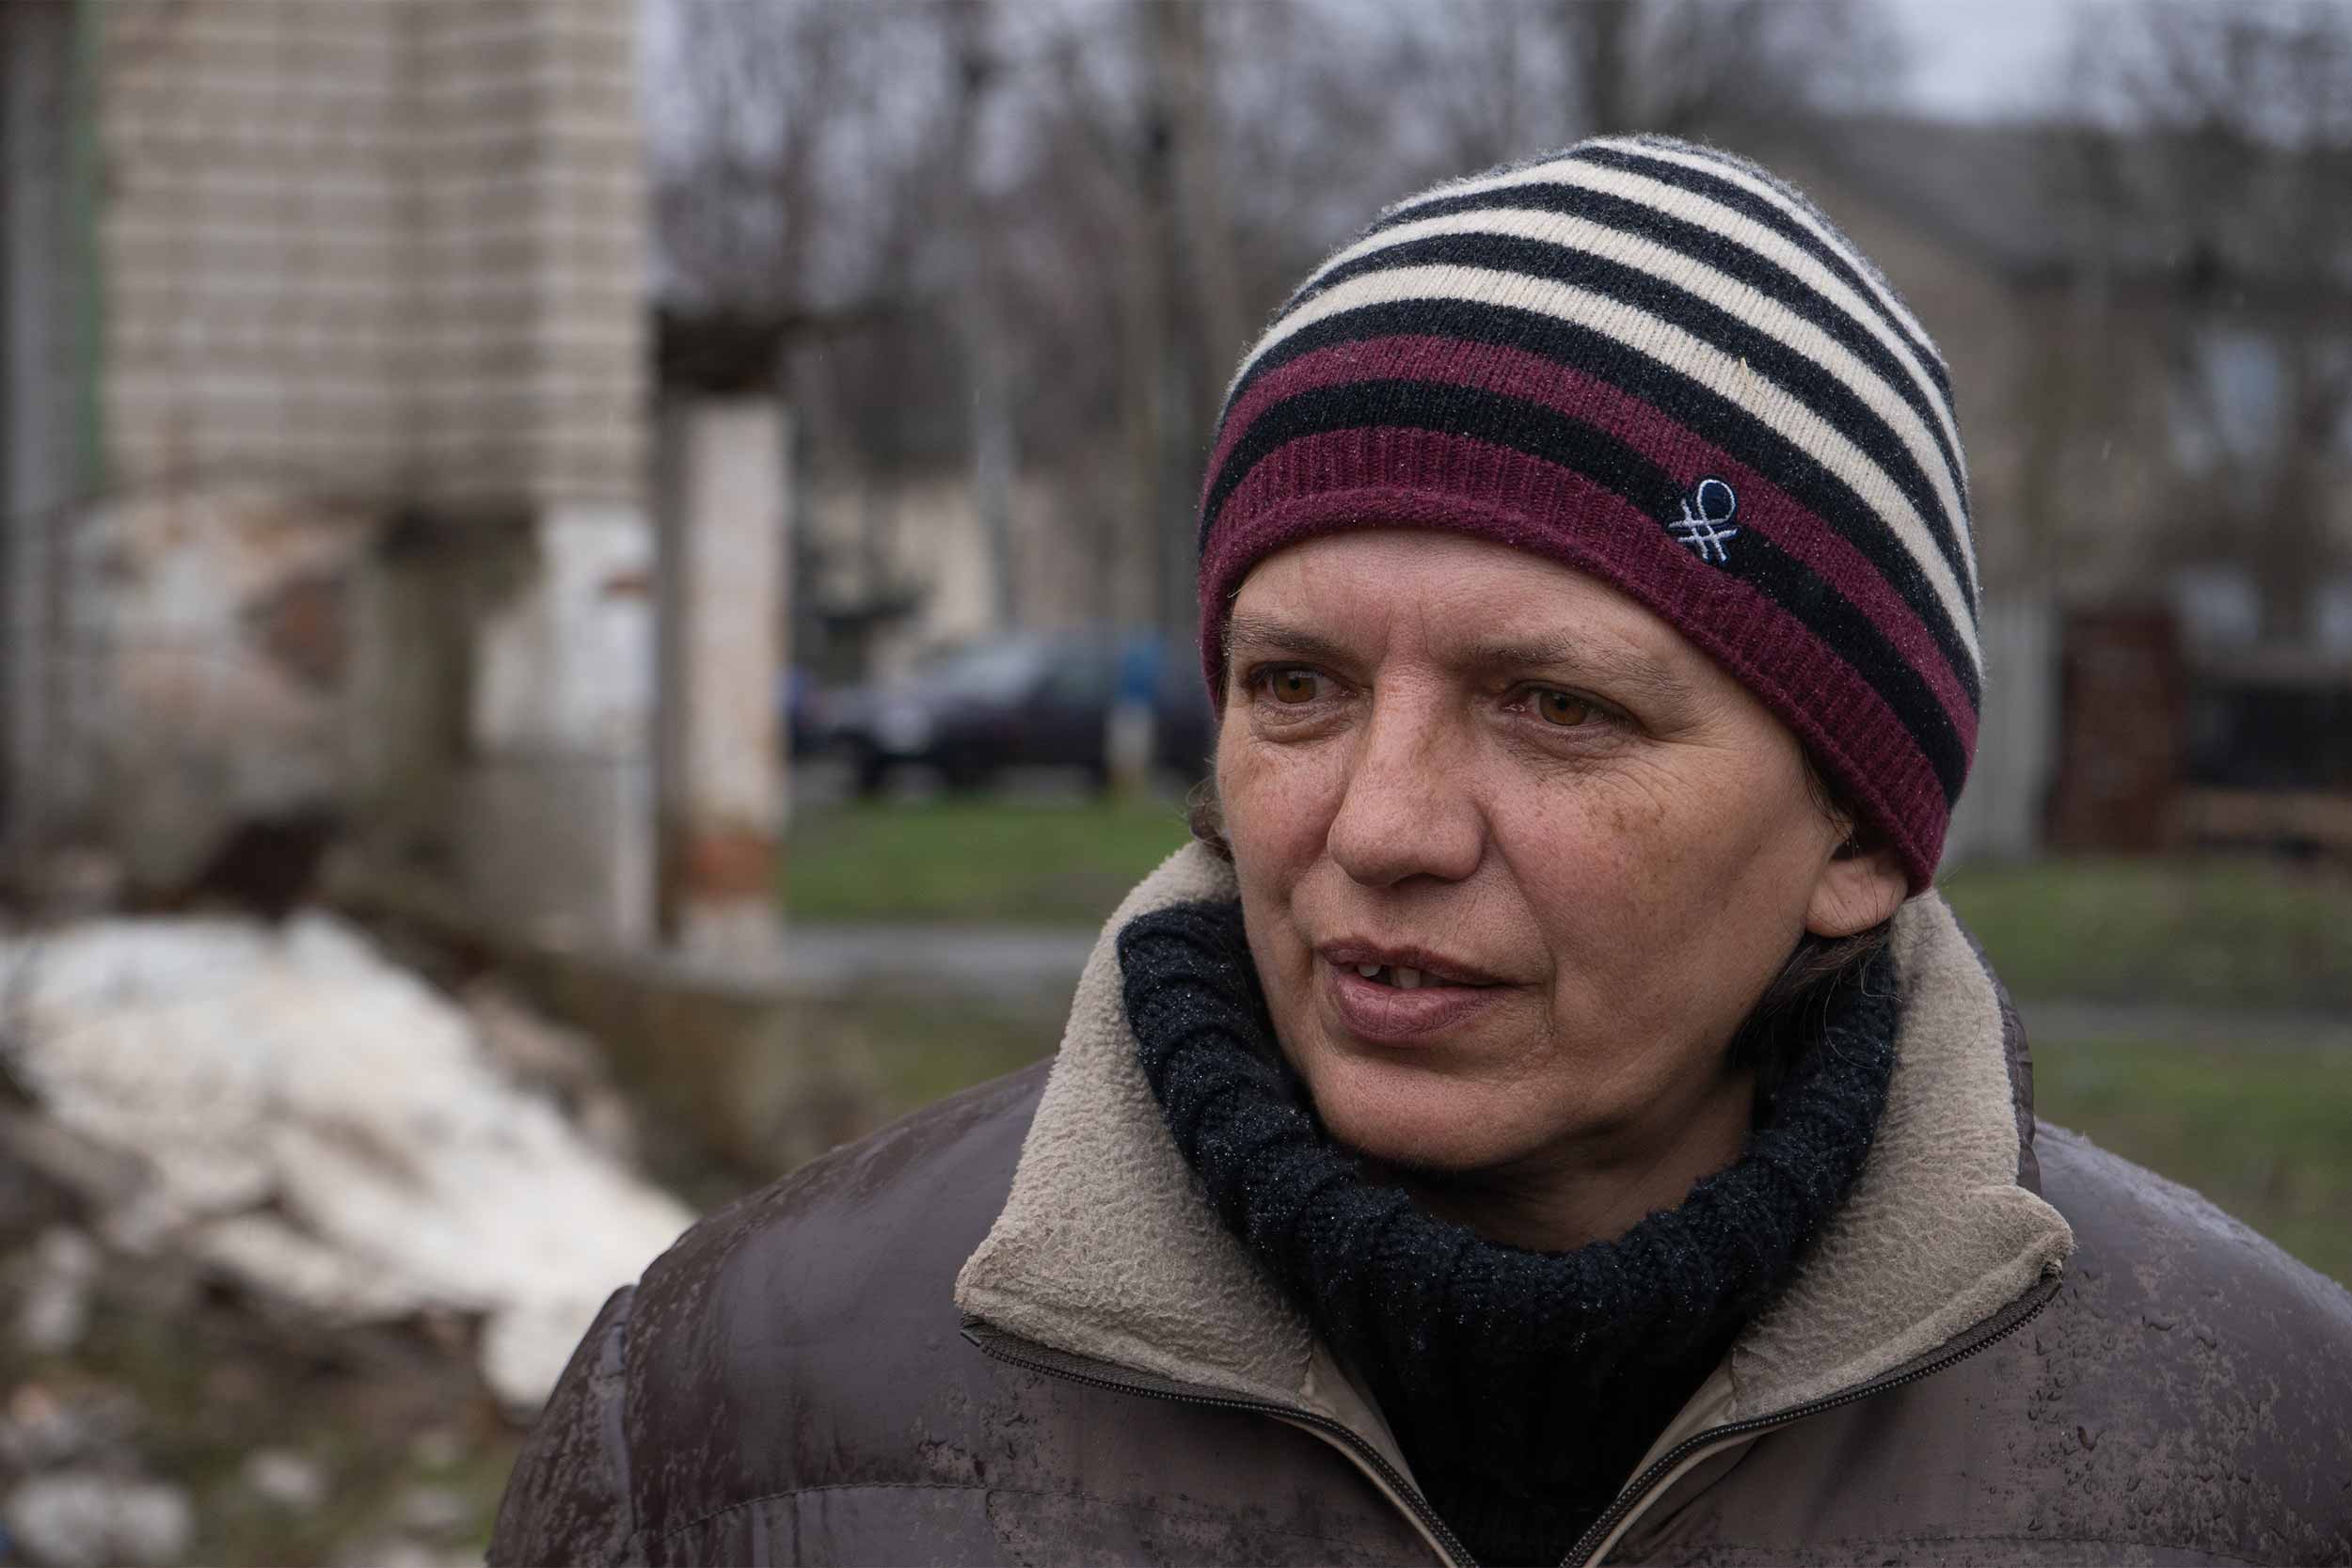 Hrushivka's resident Ksenia Samoilova, 54, informed the J9 team group that villagers had spotted the bodies of two Russian soldiers near a destroyed dormitory. She said that, despite the violence, Russian soldiers should be buried. © Ihor Tambiiev